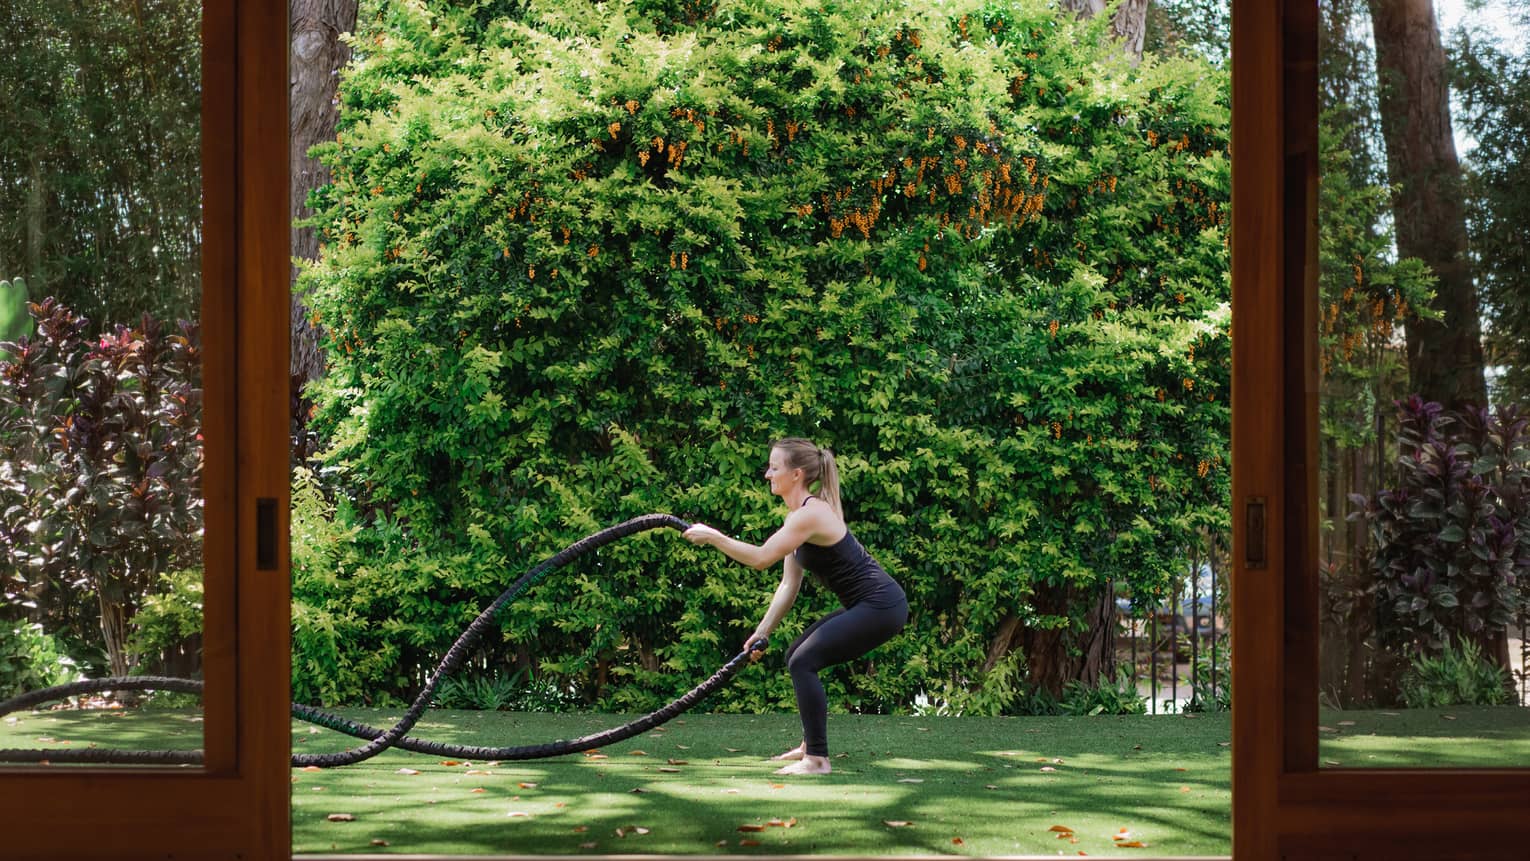 A woman does rope exercise outside on grass